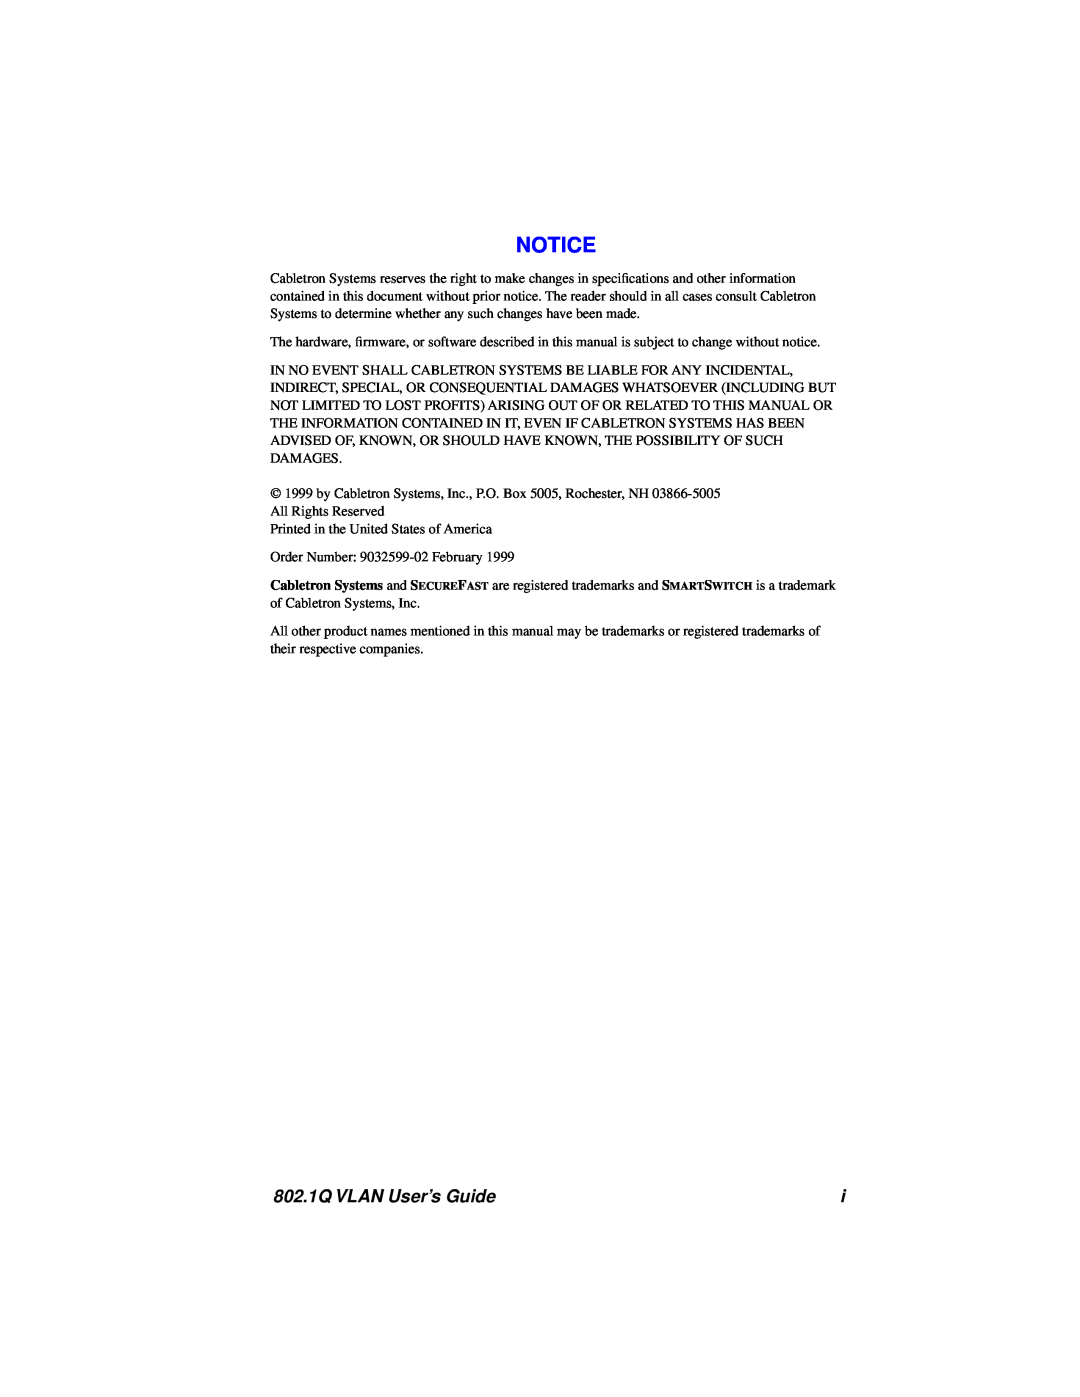 Cabletron Systems manual 802.1Q VLAN User’s Guide 